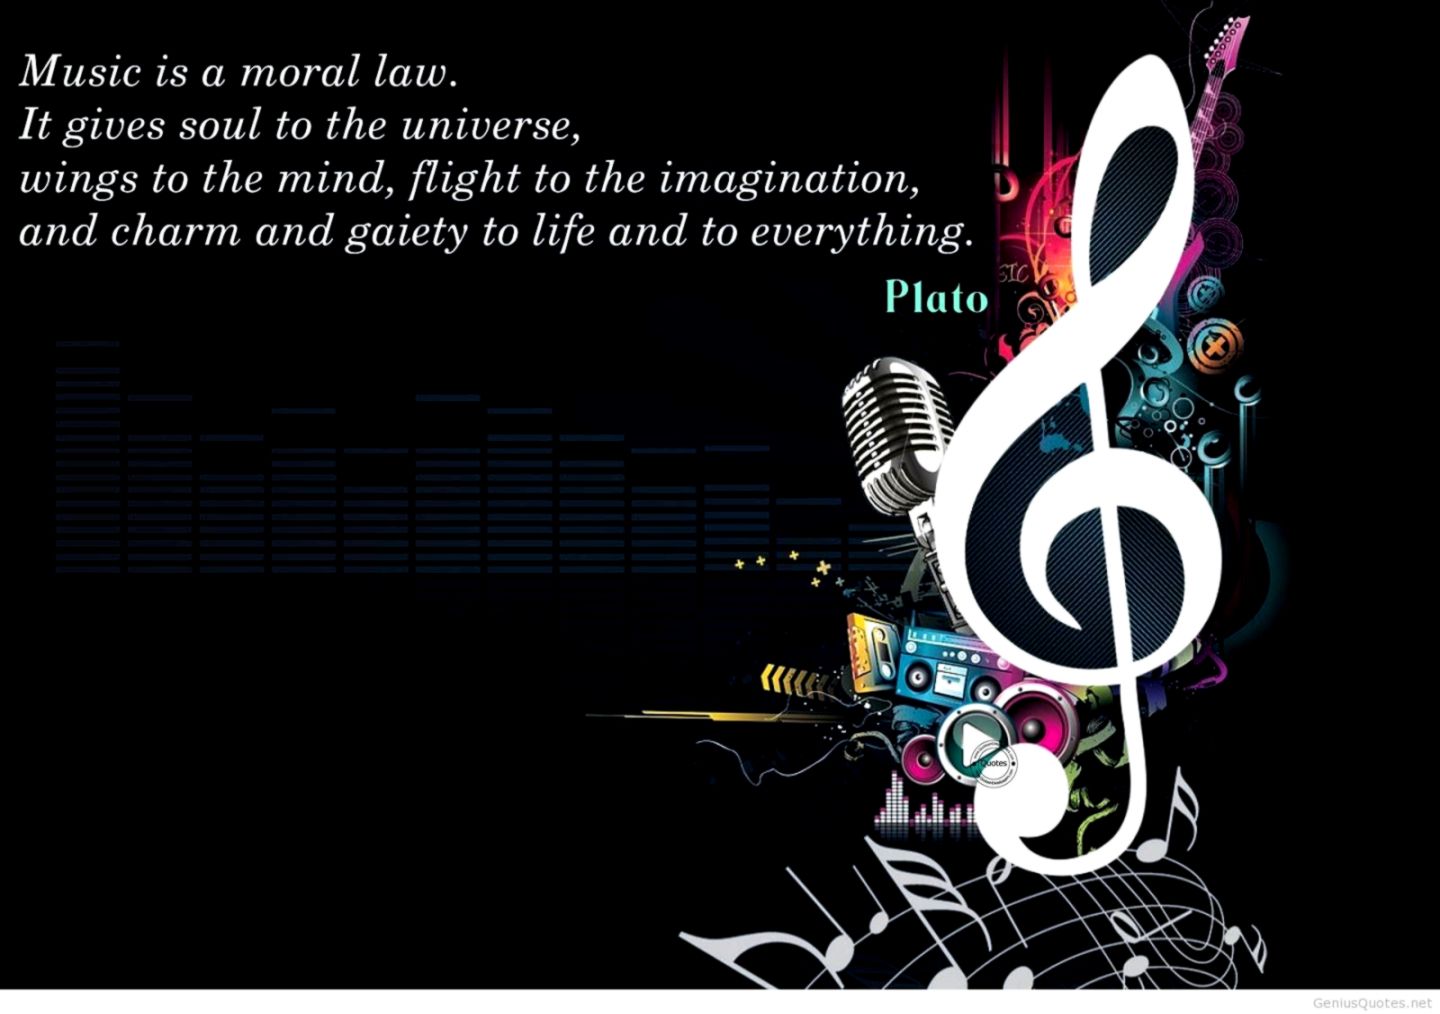 A Musical Mind Matters Keep Music In Schools Trickeybusinessblog - Music Is A Moral Law It Gives Soul To The Universe , HD Wallpaper & Backgrounds